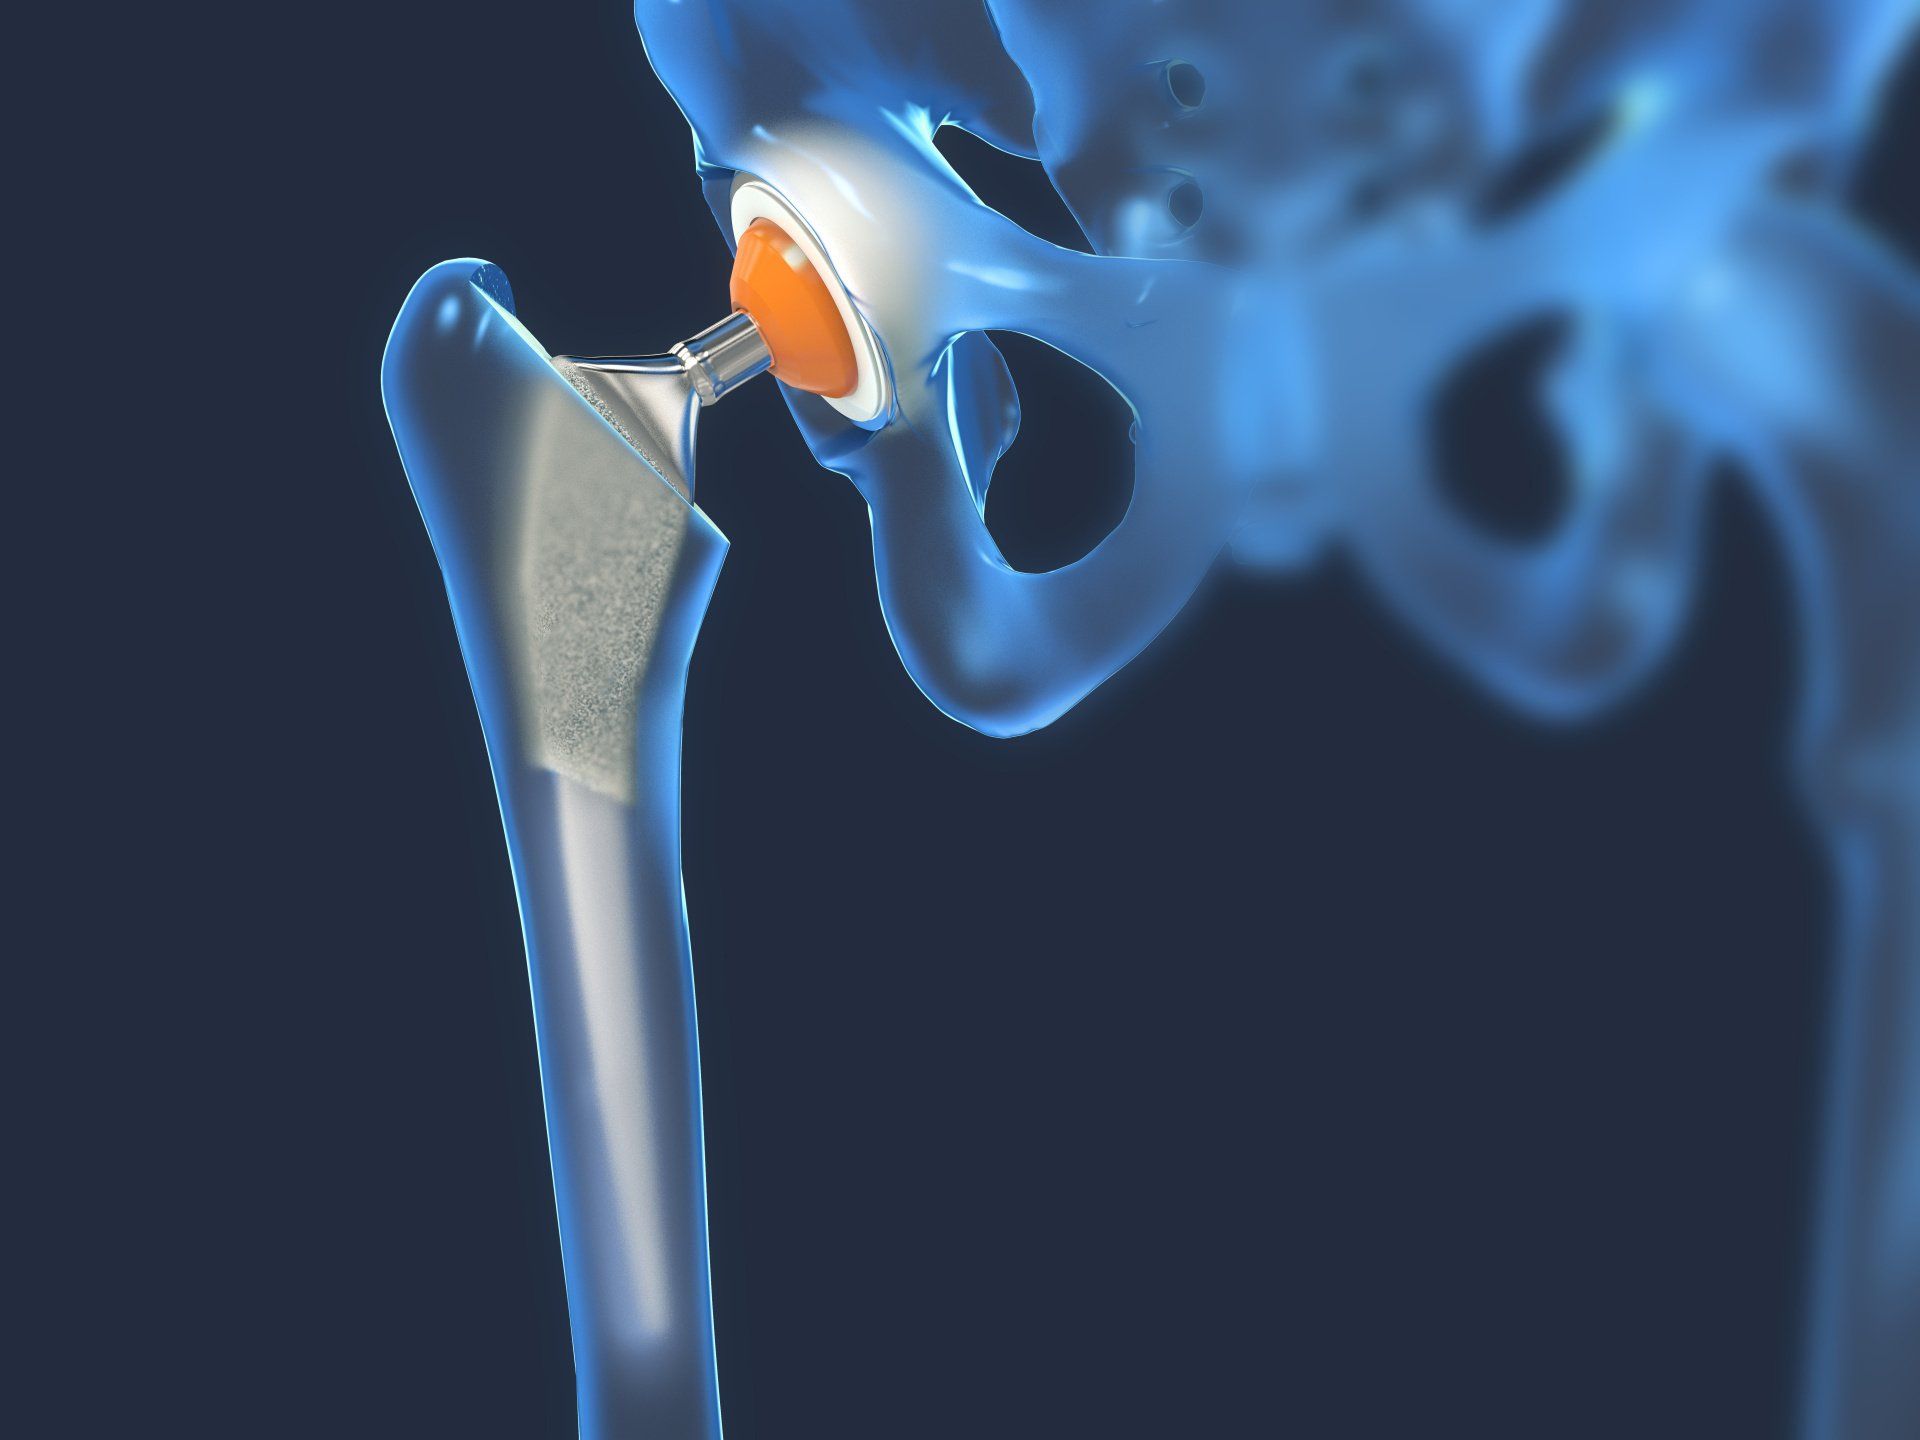 SuperPath vs. Anterior Hip Replacement: Which is Better?